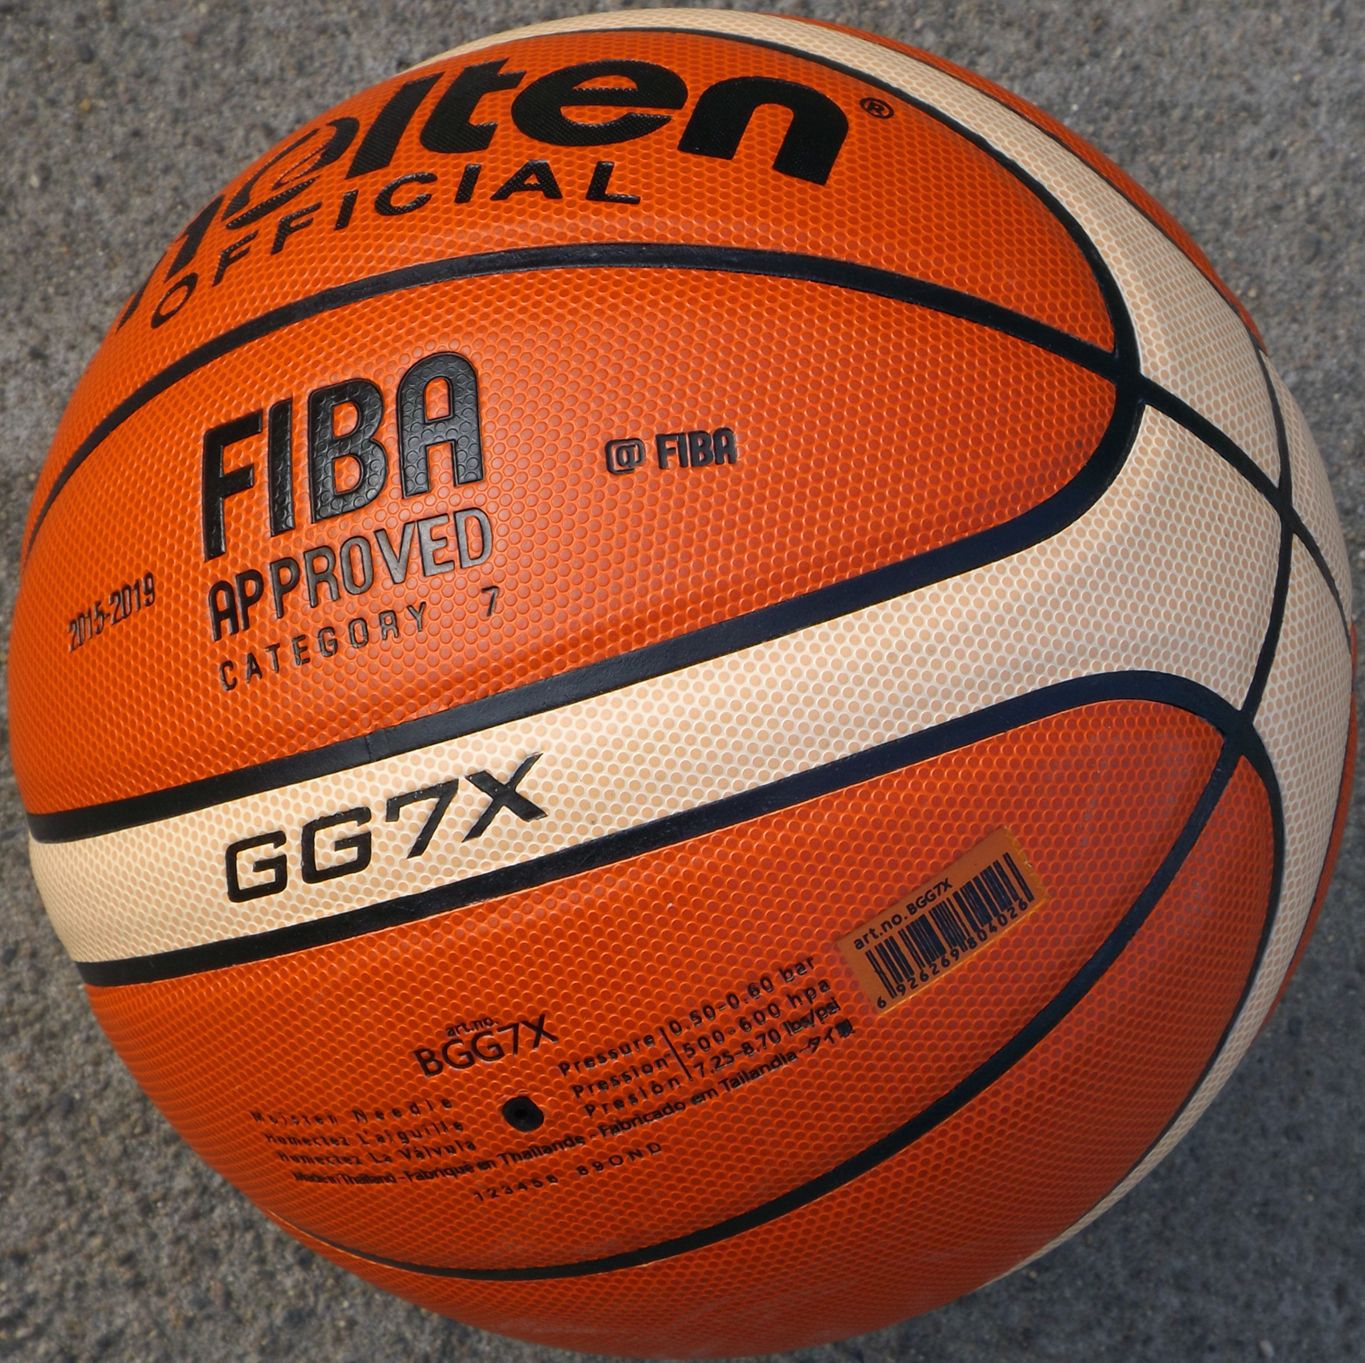 FIBA Approved PU Leather Basketball (Size 7). Indoor & Outdoor. Thickened Leather, Superior Grip, Durable Nylon. Cushion Control Design for Soft Touch & Bounce. Training & Games.